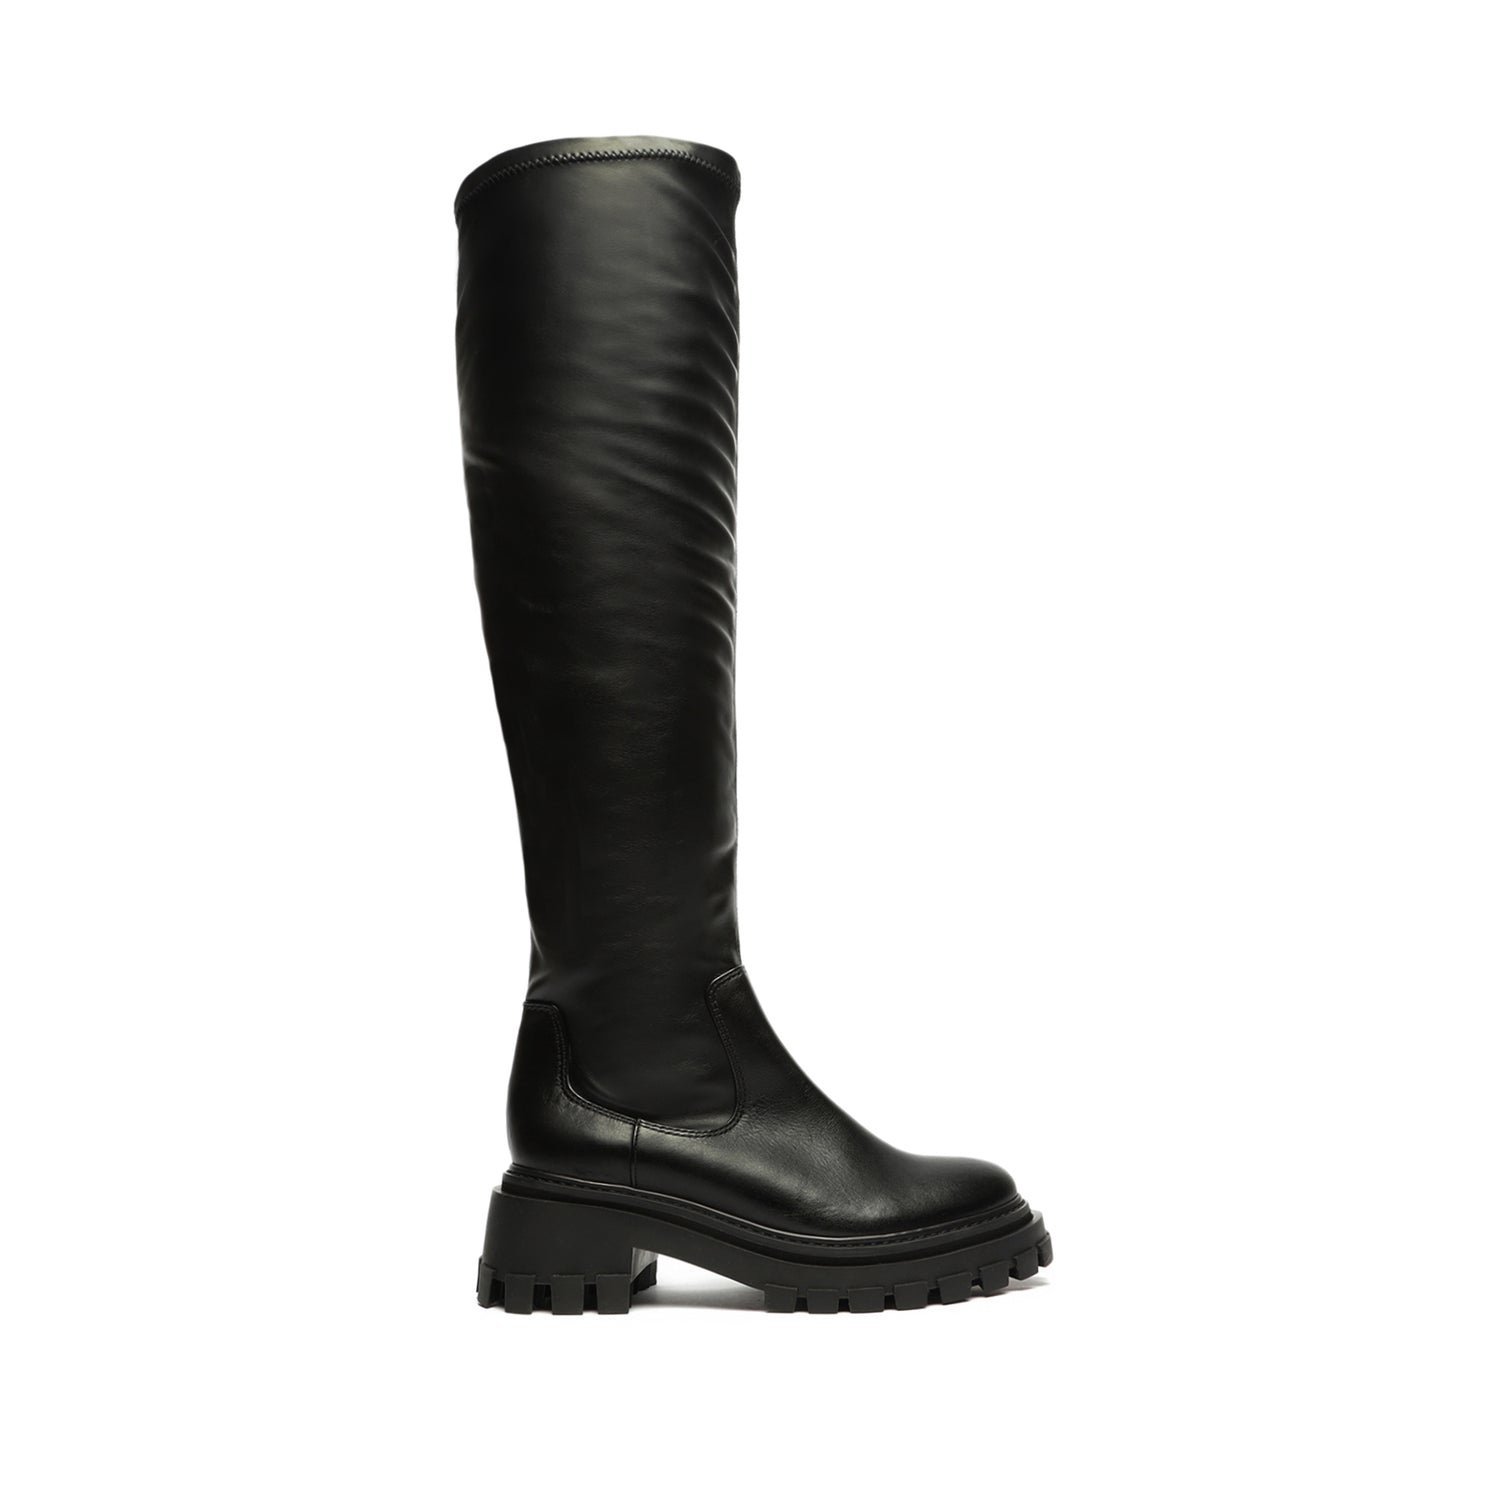 Kendy Up Leather Boot Black Nappa Leather